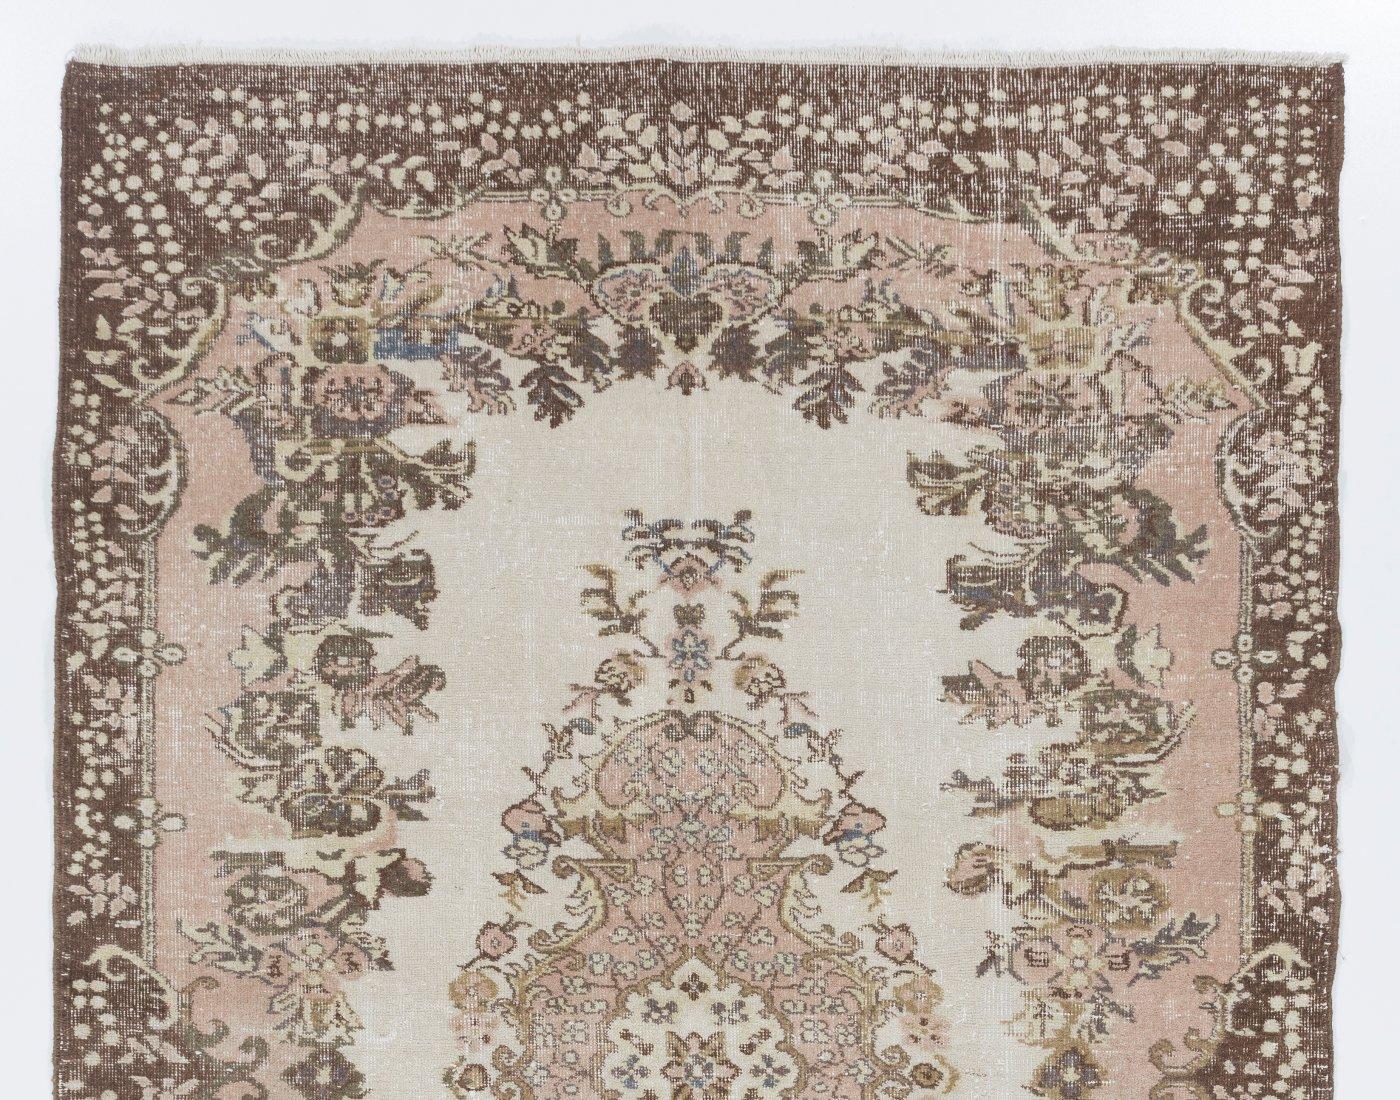 A hand-knotted vintage Turkish accent rug. The rug features a floral medallion design in a field decorated with floral motifs. It has low distressed wool pile on cotton foundation, is in very good condition, sturdy and clean as a brand new rug.